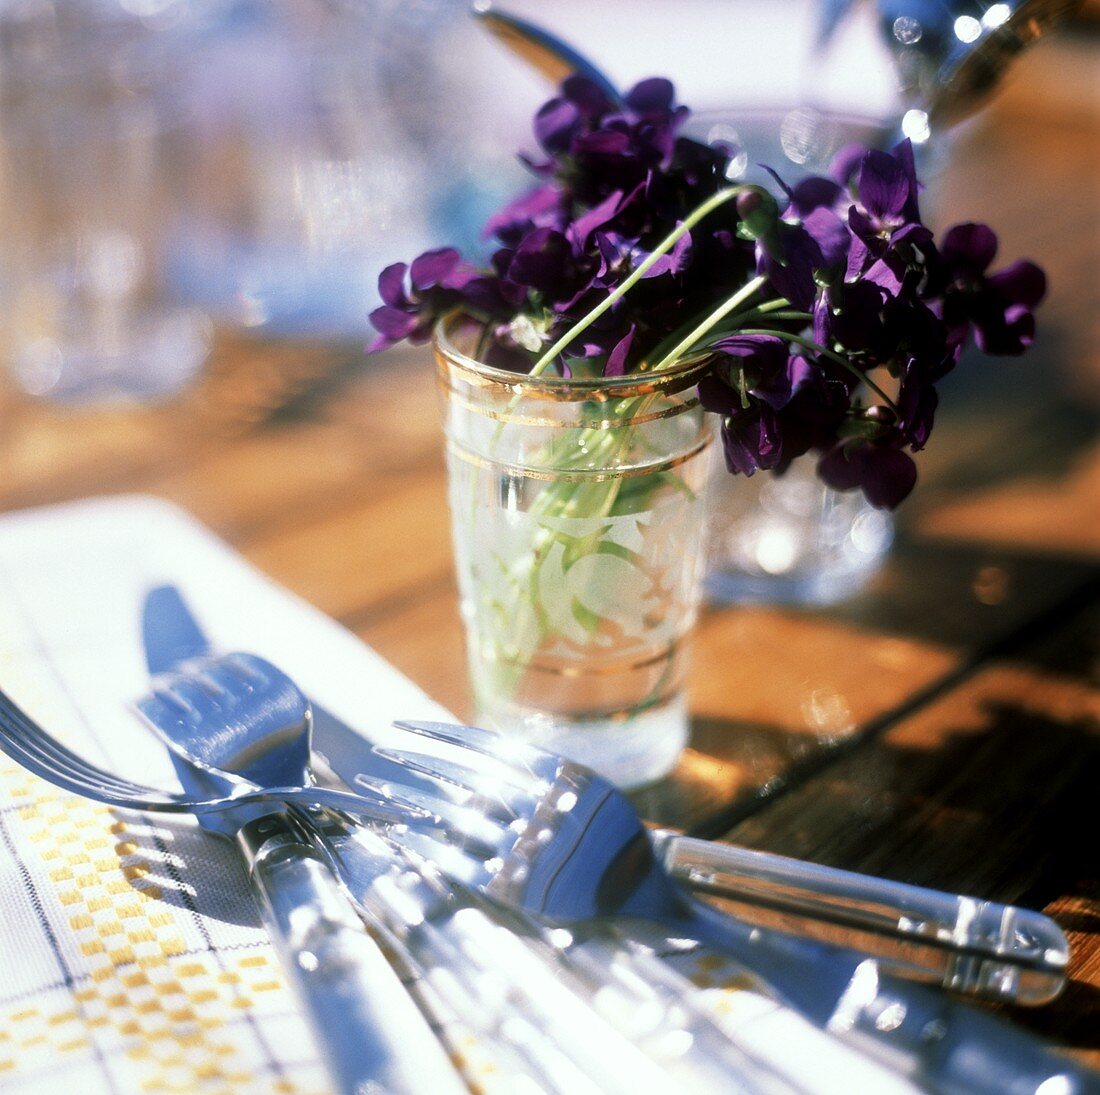 Violets in a Glass of Water; Utensils